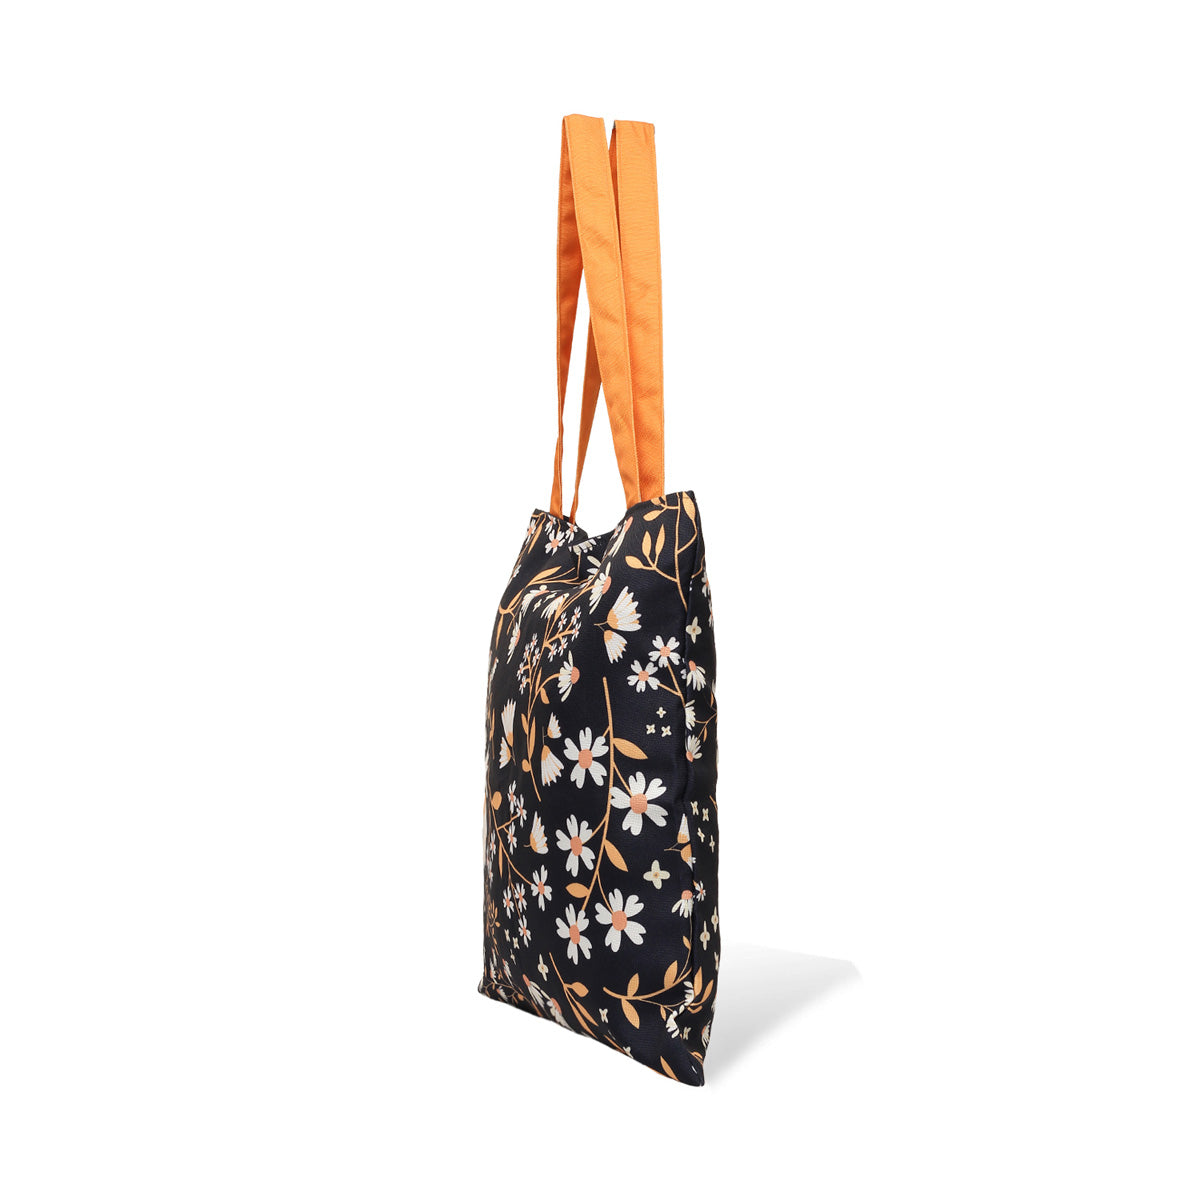 side view of Floral tote bag with vibrant orange handles.